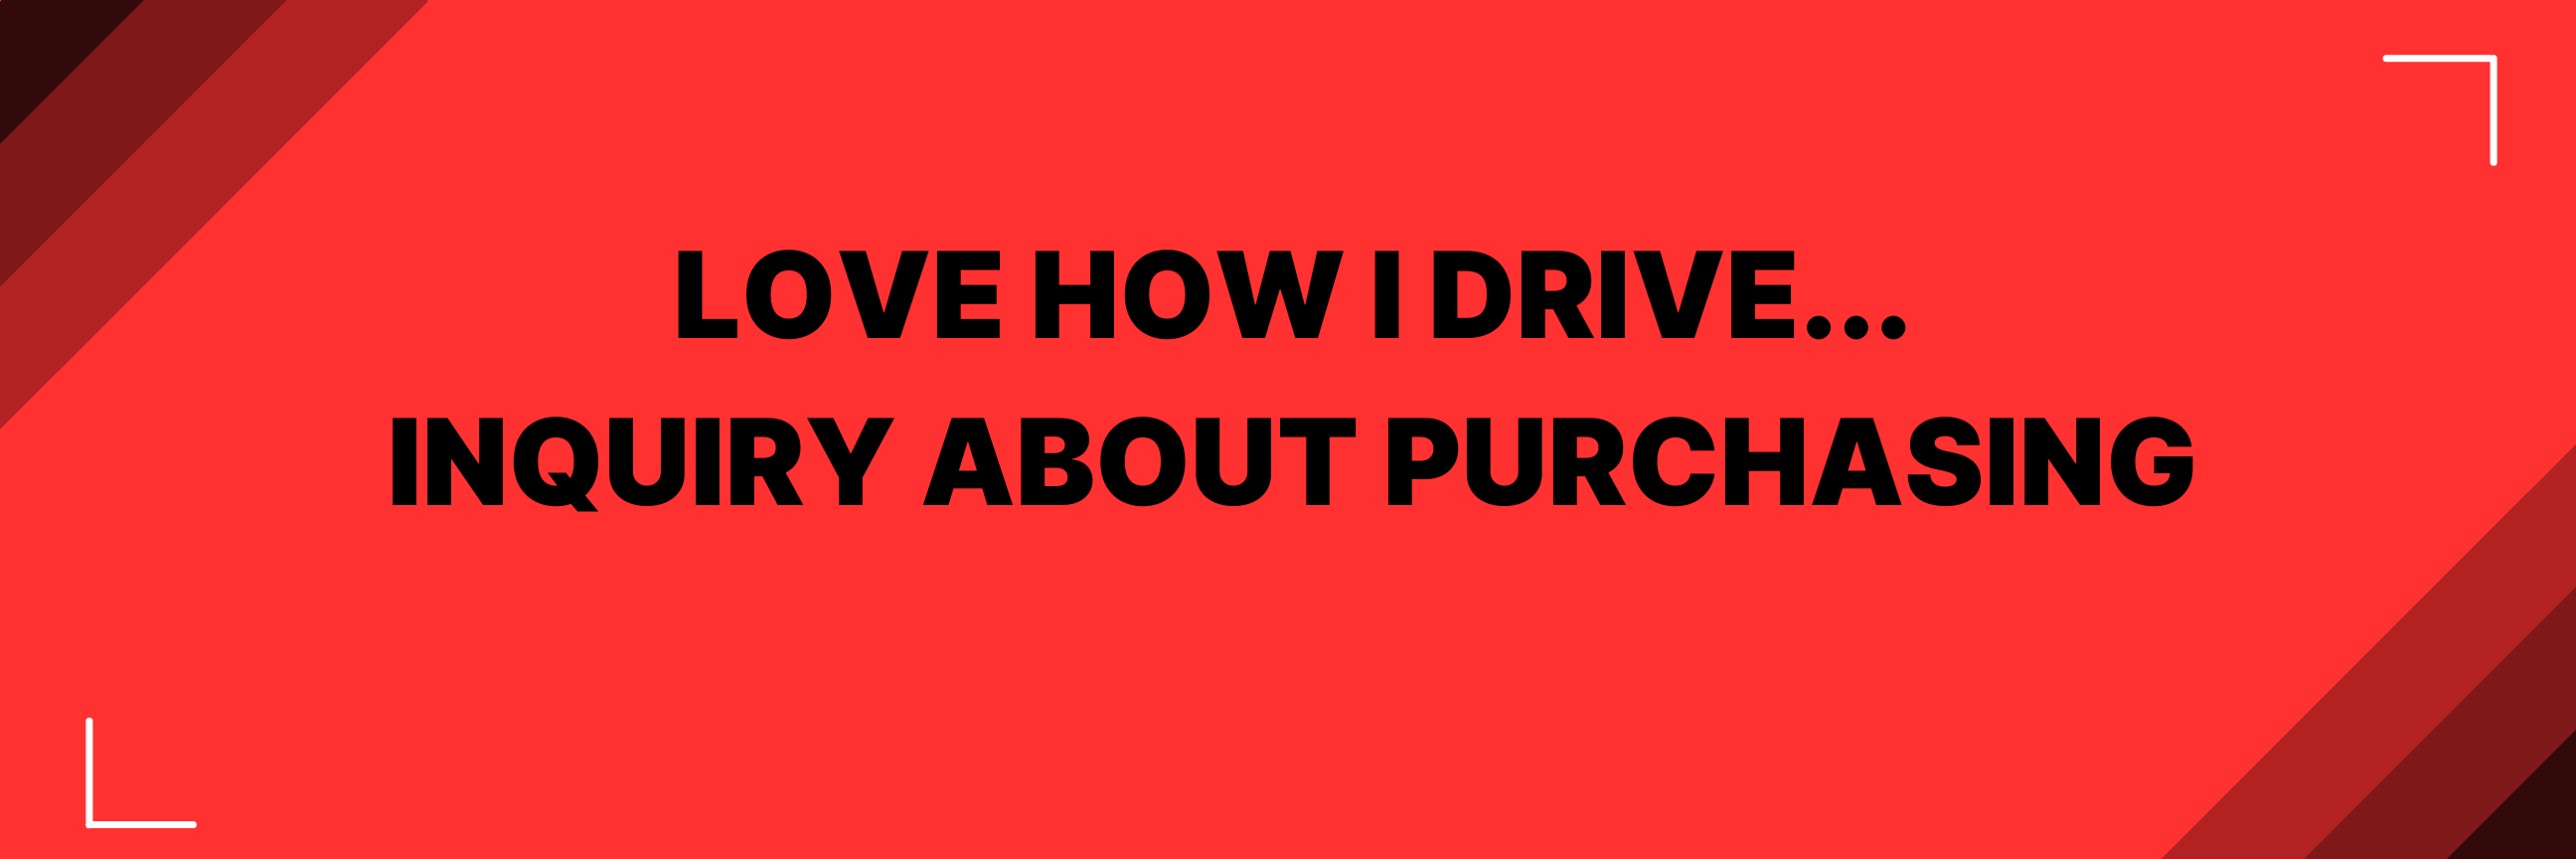 Love How I Drive - Inquiry About Purchasing